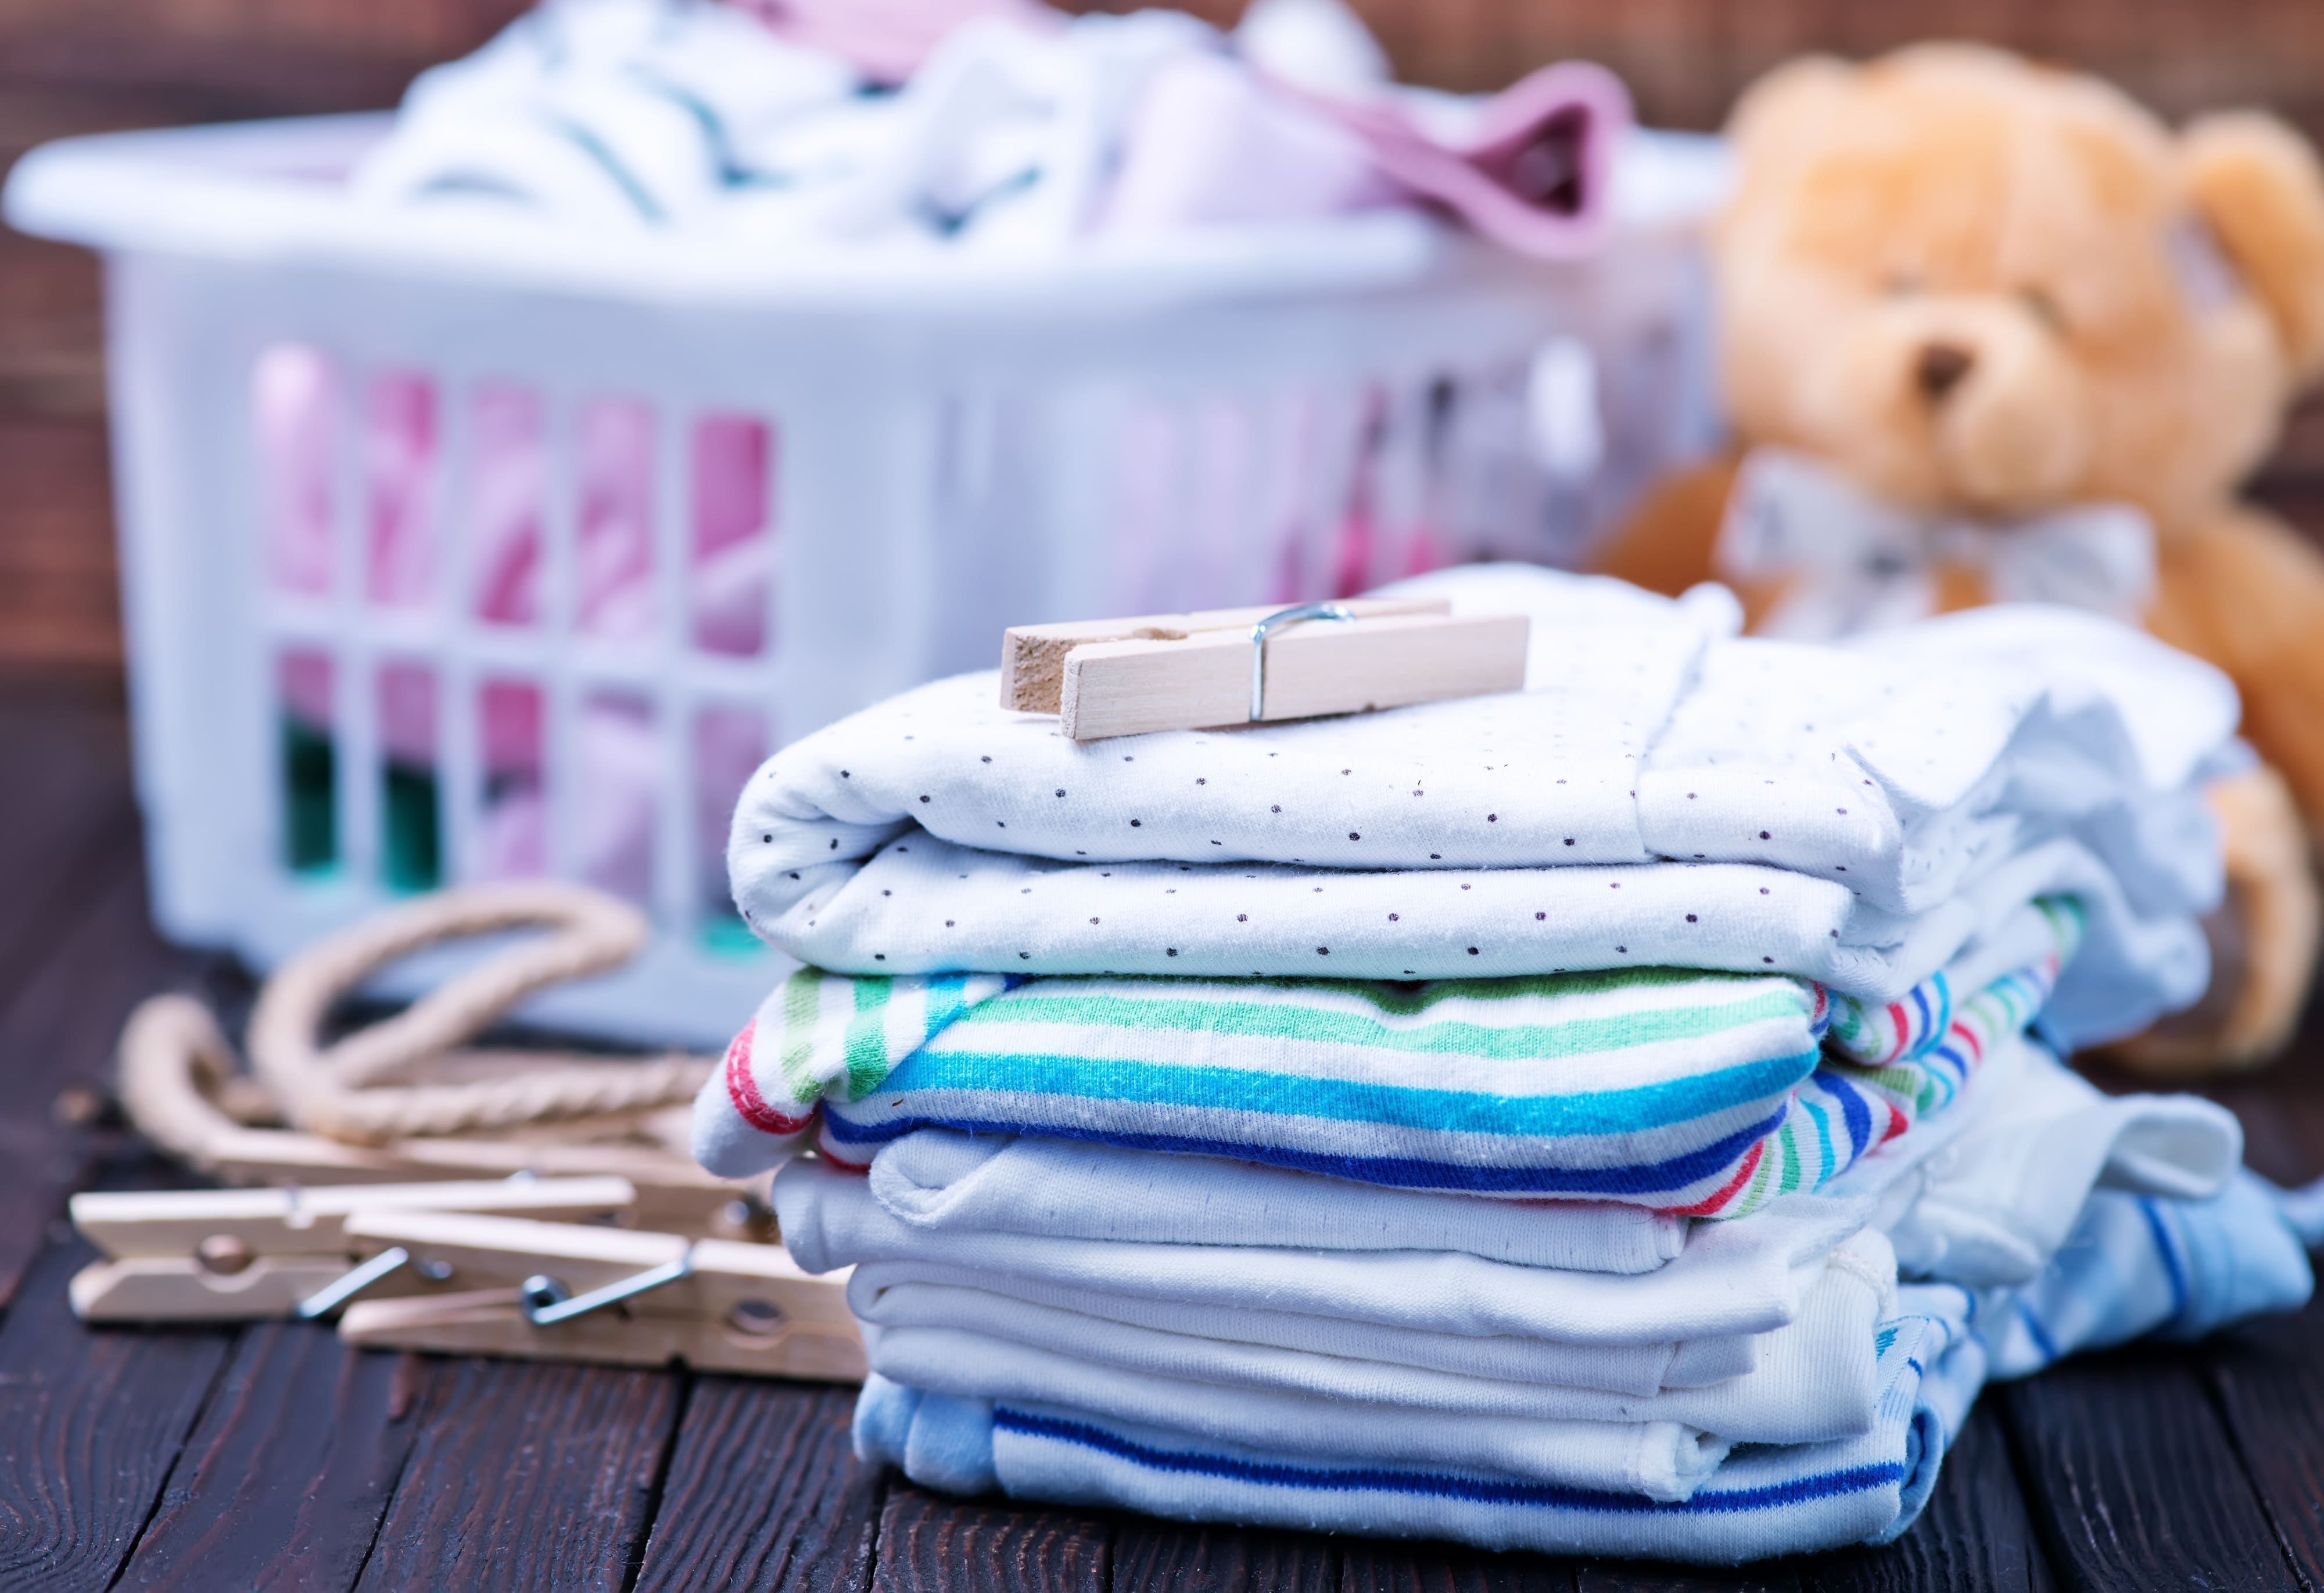 A laundry basket full of baby laundry and a stack of folded clothes sit on a wooden table.